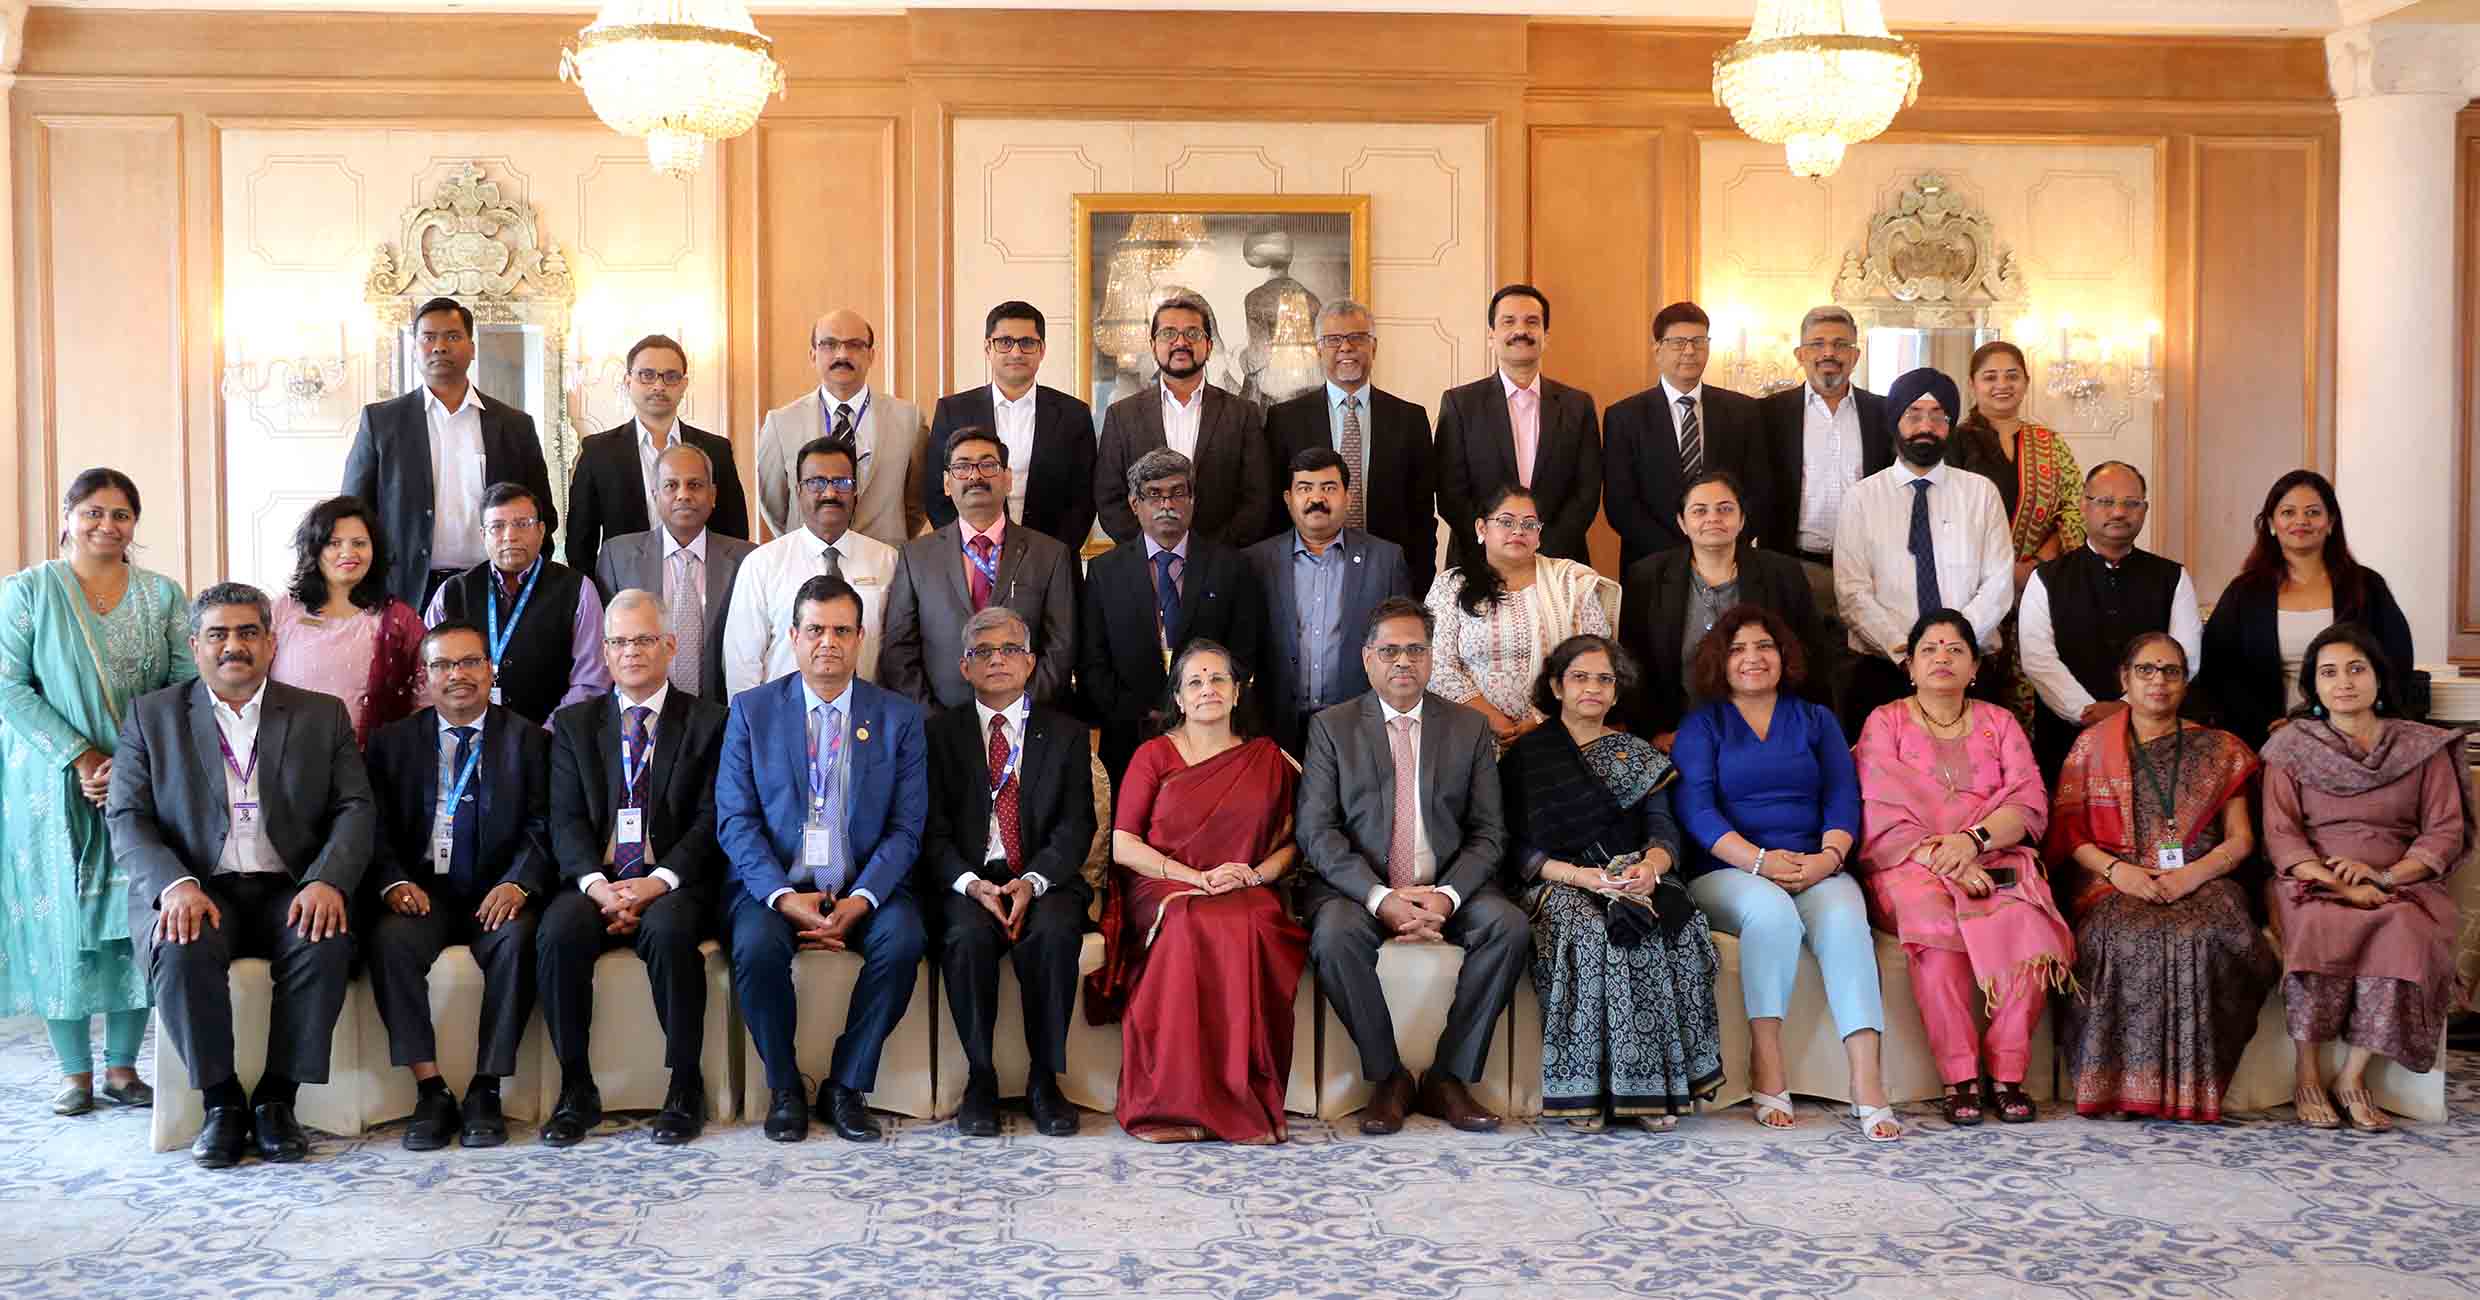 Photos at Conference of Heads of Chief Human Resources Officers (CHROs) and Chief Learning Officers (CLOs) of Banks, Financial Institutions (FIs) and NBFCs